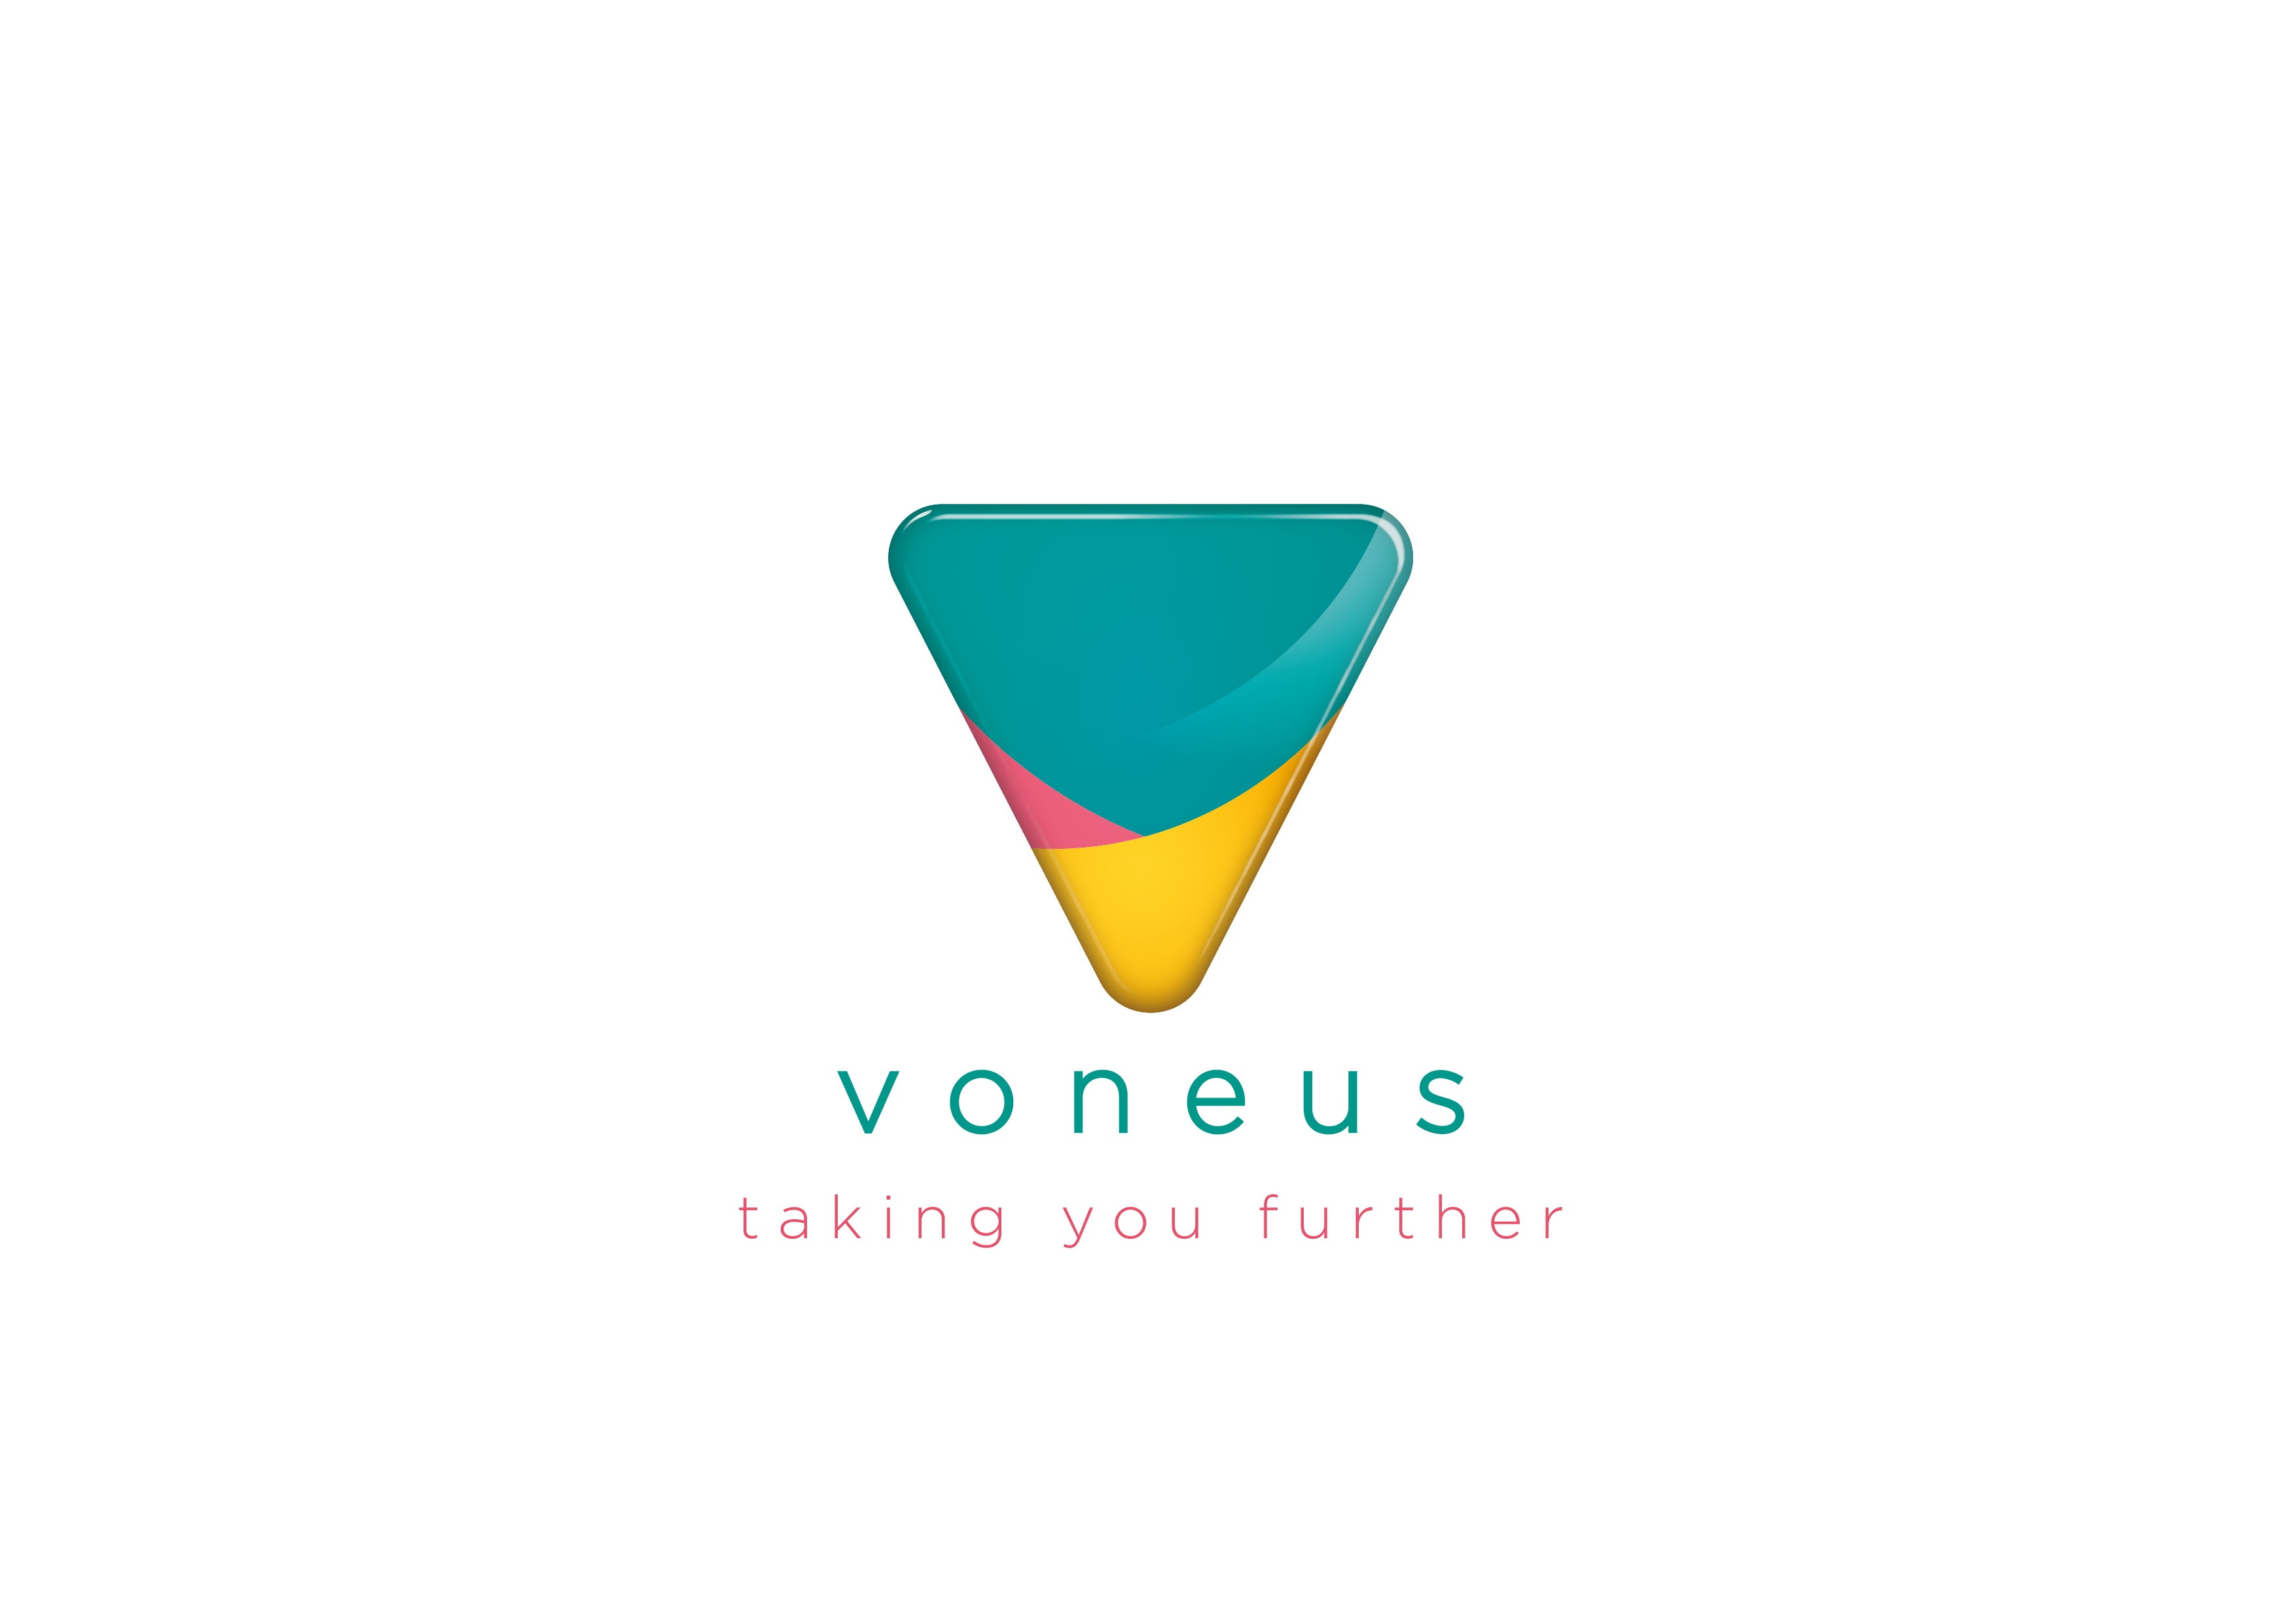 Investee Voneus secures £4.8m Growth Capital & £500k of equity investment